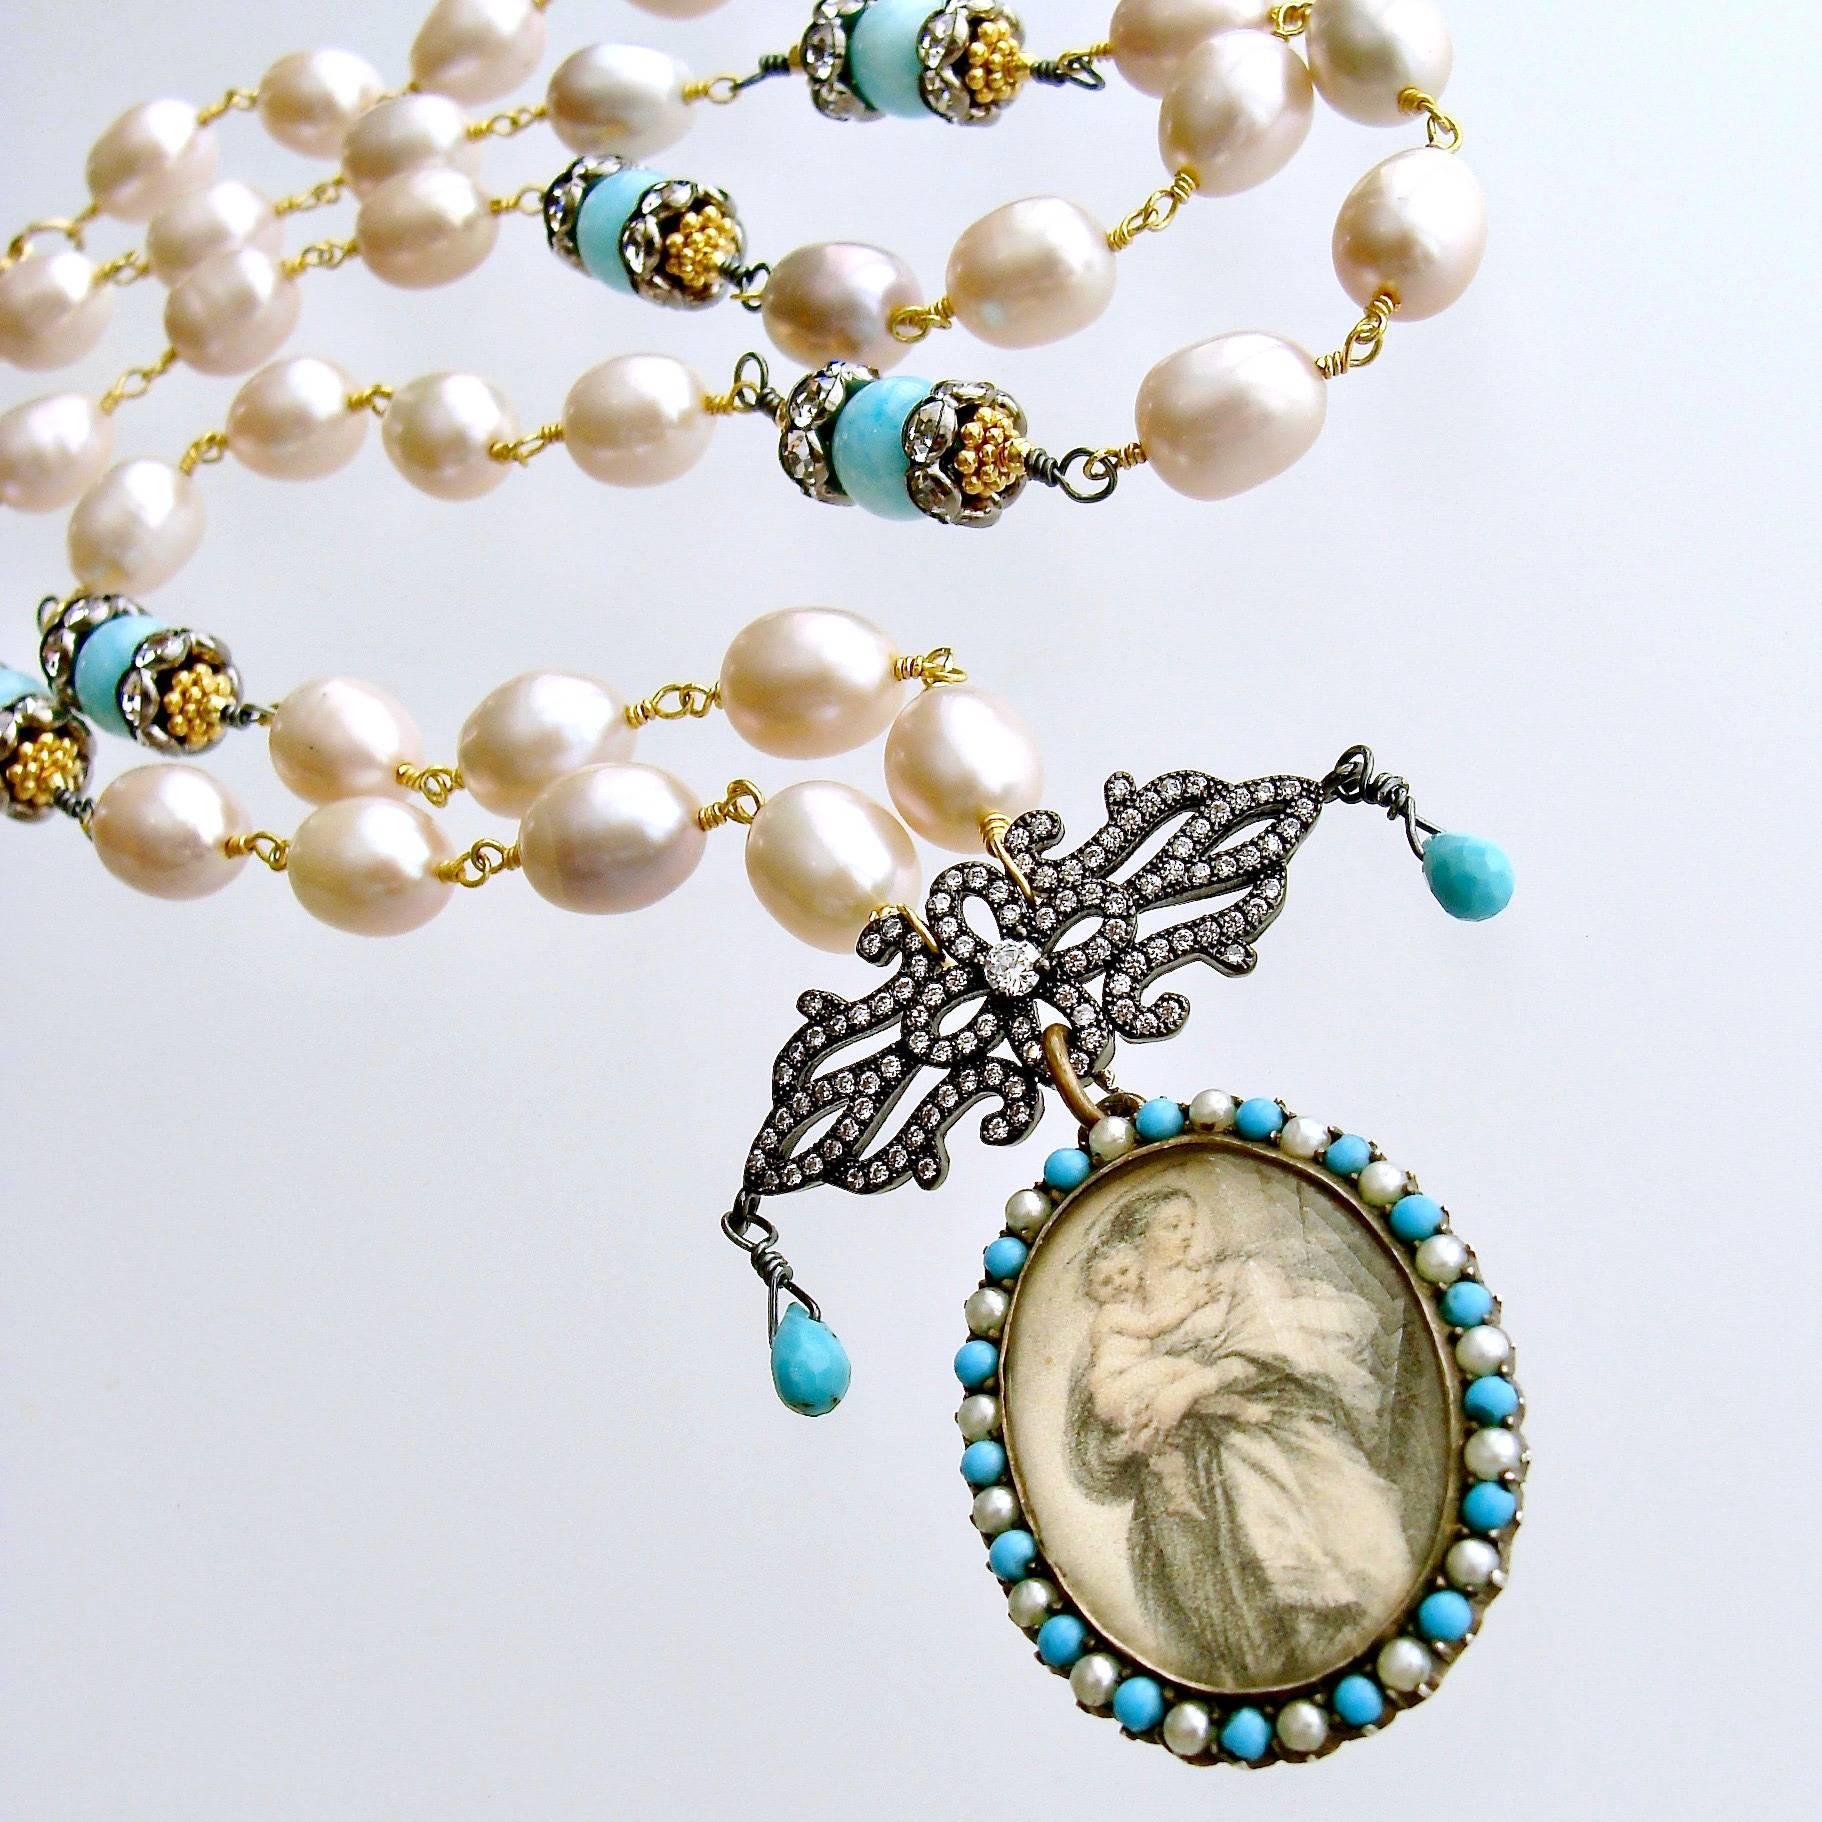 Madonna And Child Necklace.

Silky blush pink Baroque pearls are rhythmically intercepted with stations of pale aqua amazonite, flanked by mixed metals of oxidized silver and gold vermeil crystal rondelles.  This gorgeous color combination leads to